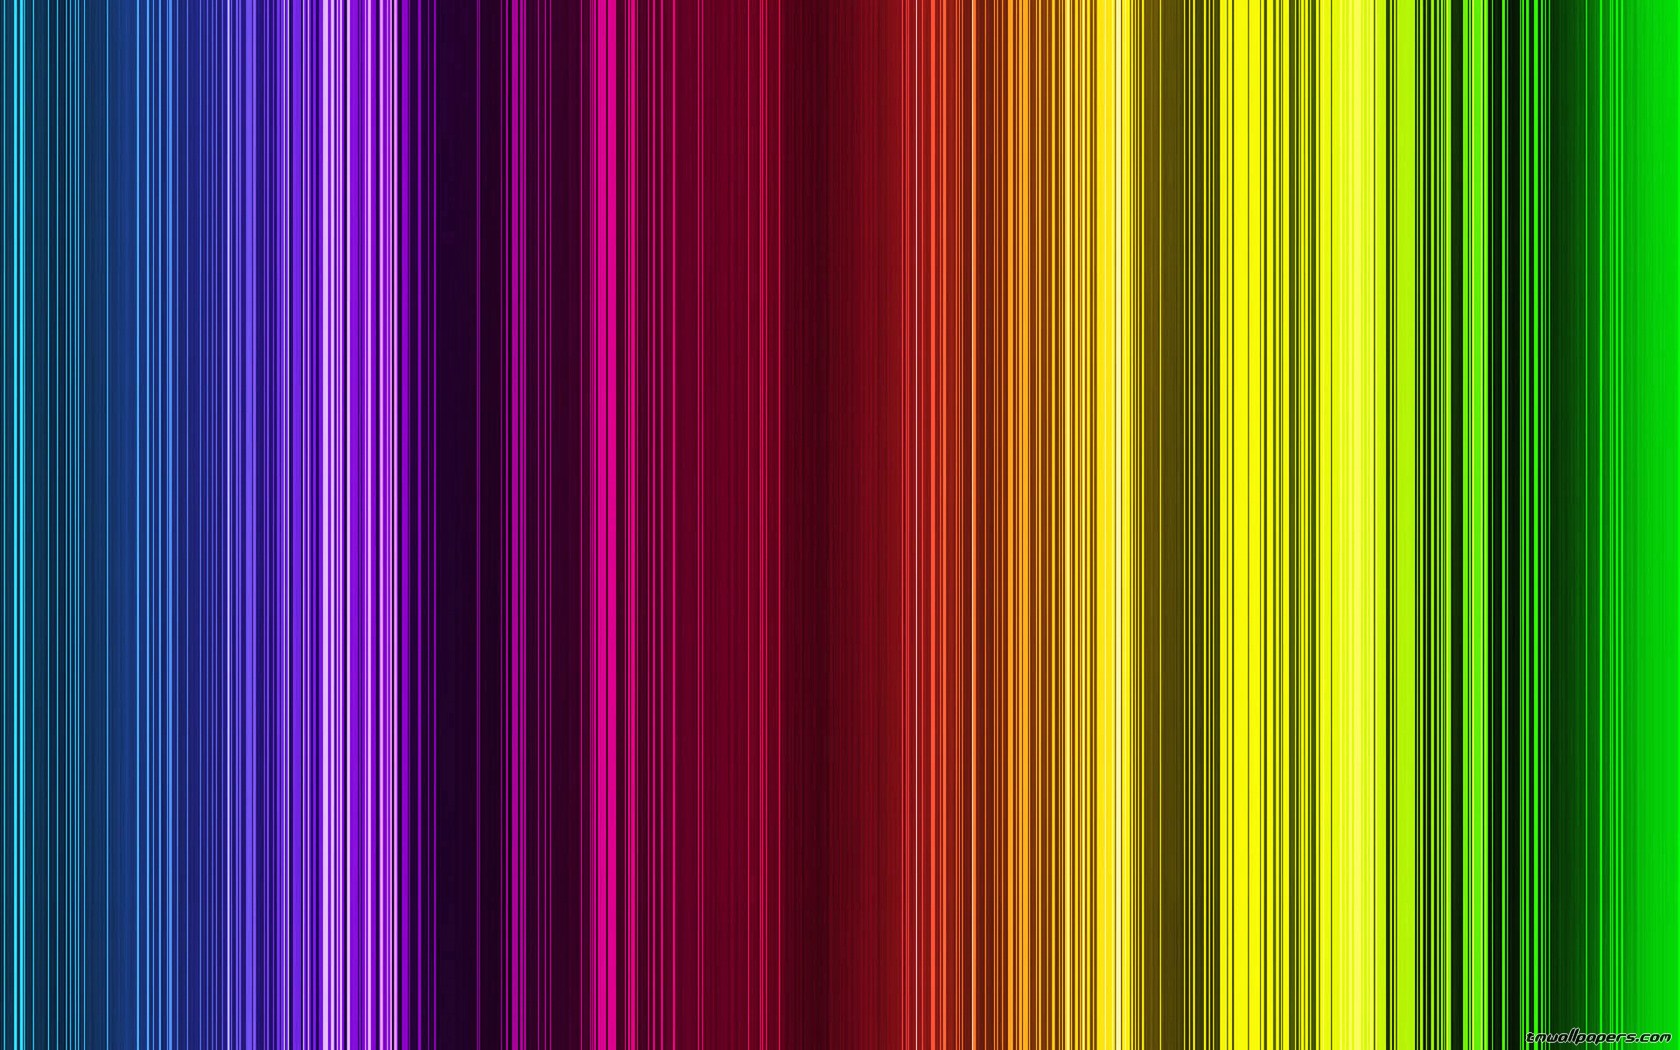 TMWallpapers Wide wallpapers e HD wallpapers   Vertical lines